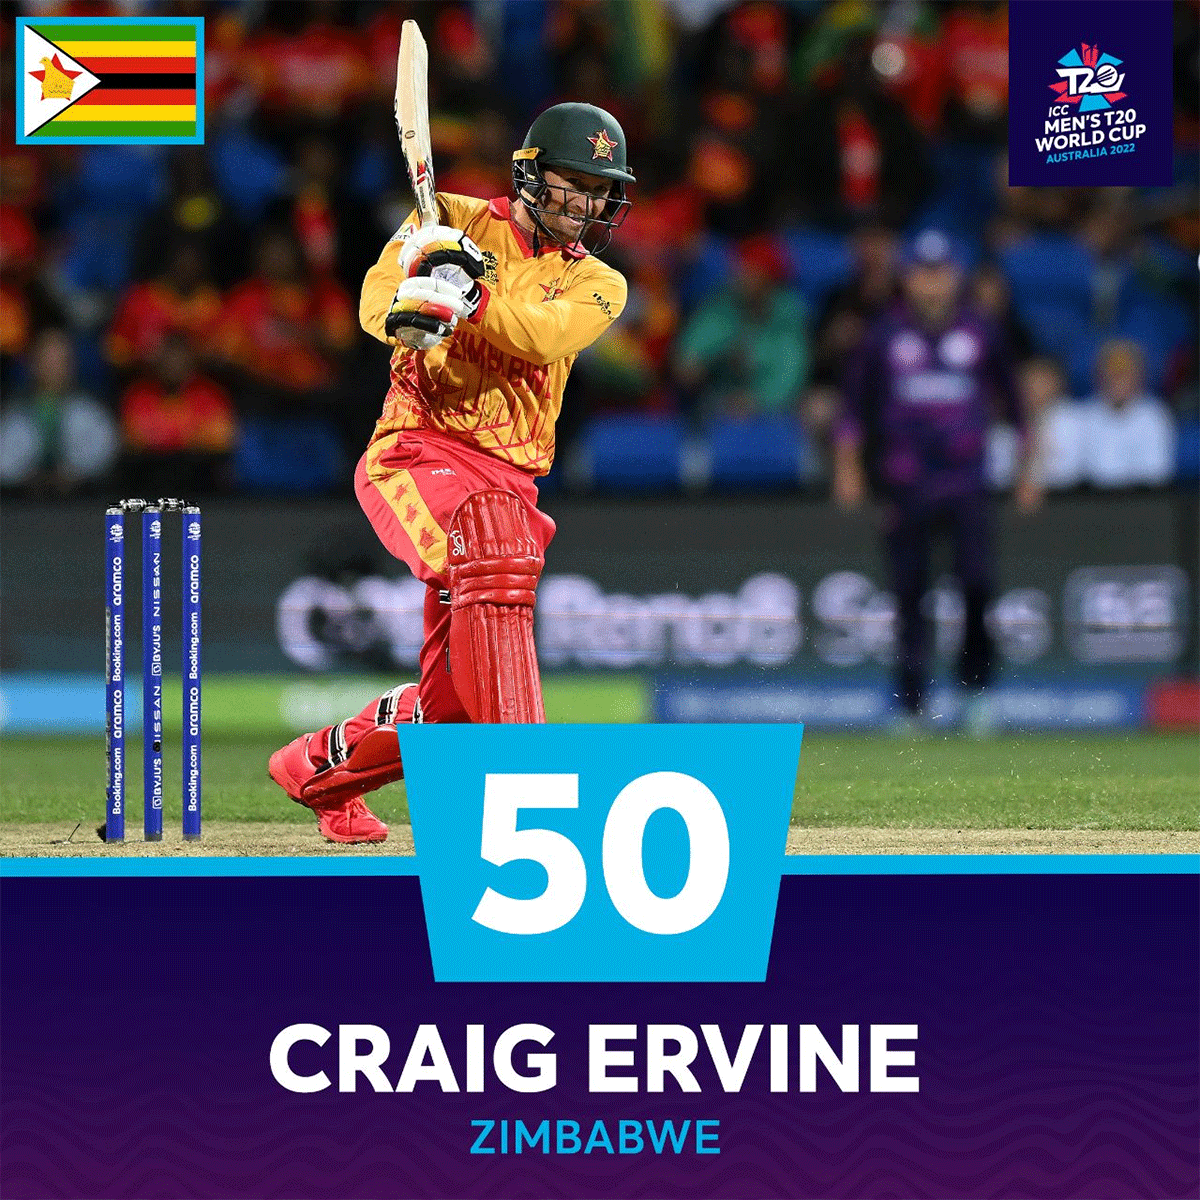 Captain Craig Erwine top-scored with 54 as Zimbabwe chased down 133 for victory